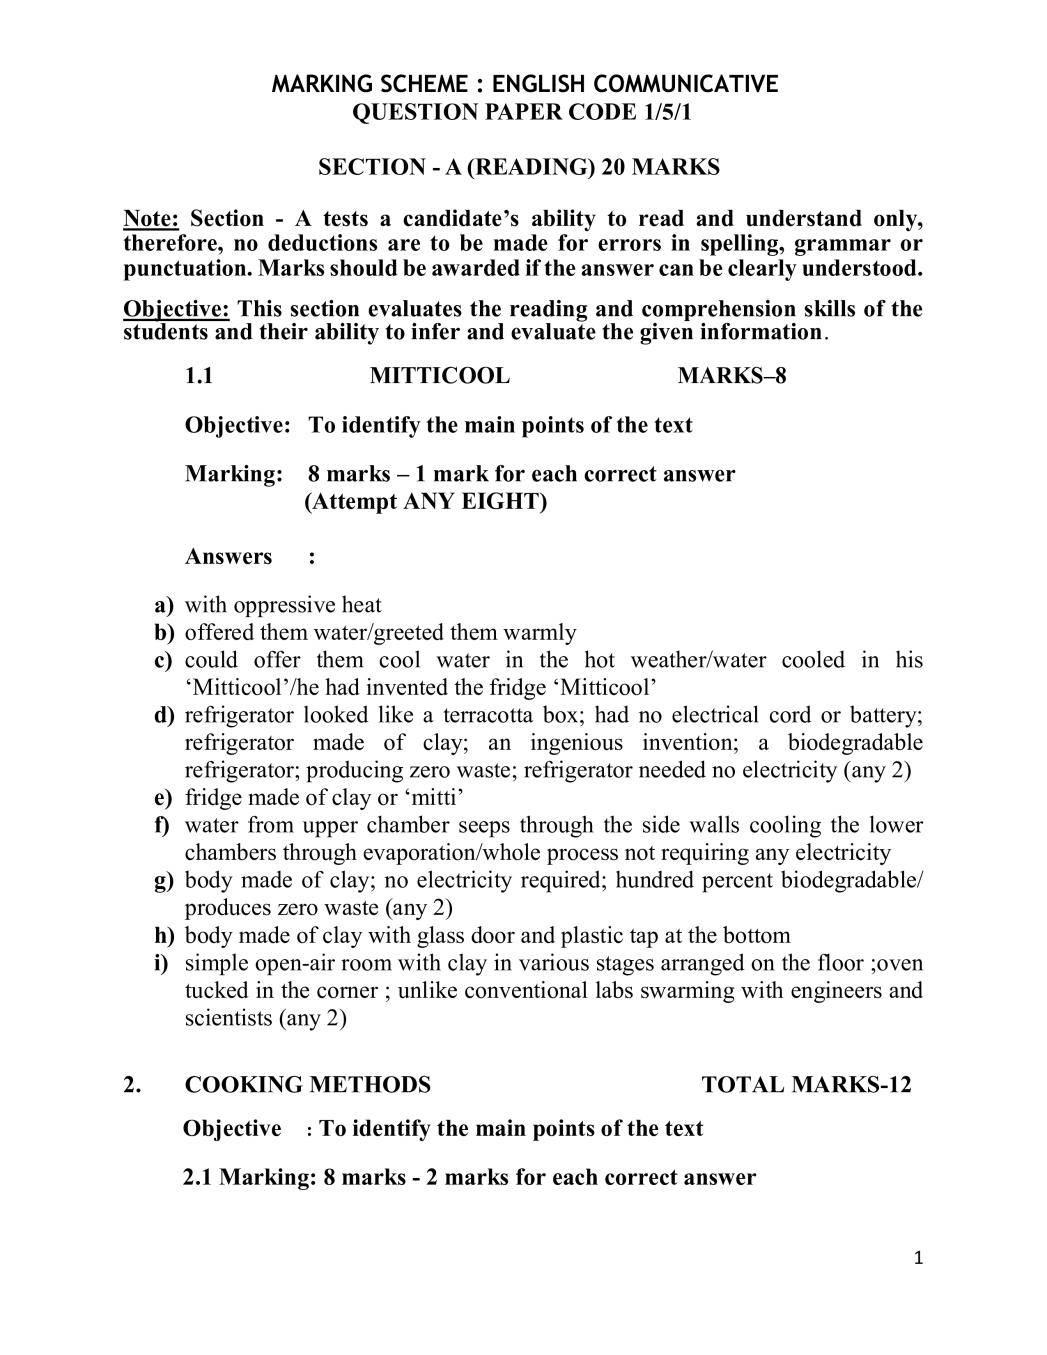 CBSE Class 10 English Communicative Question Paper 2019 Set 5 Solutions - Page 1